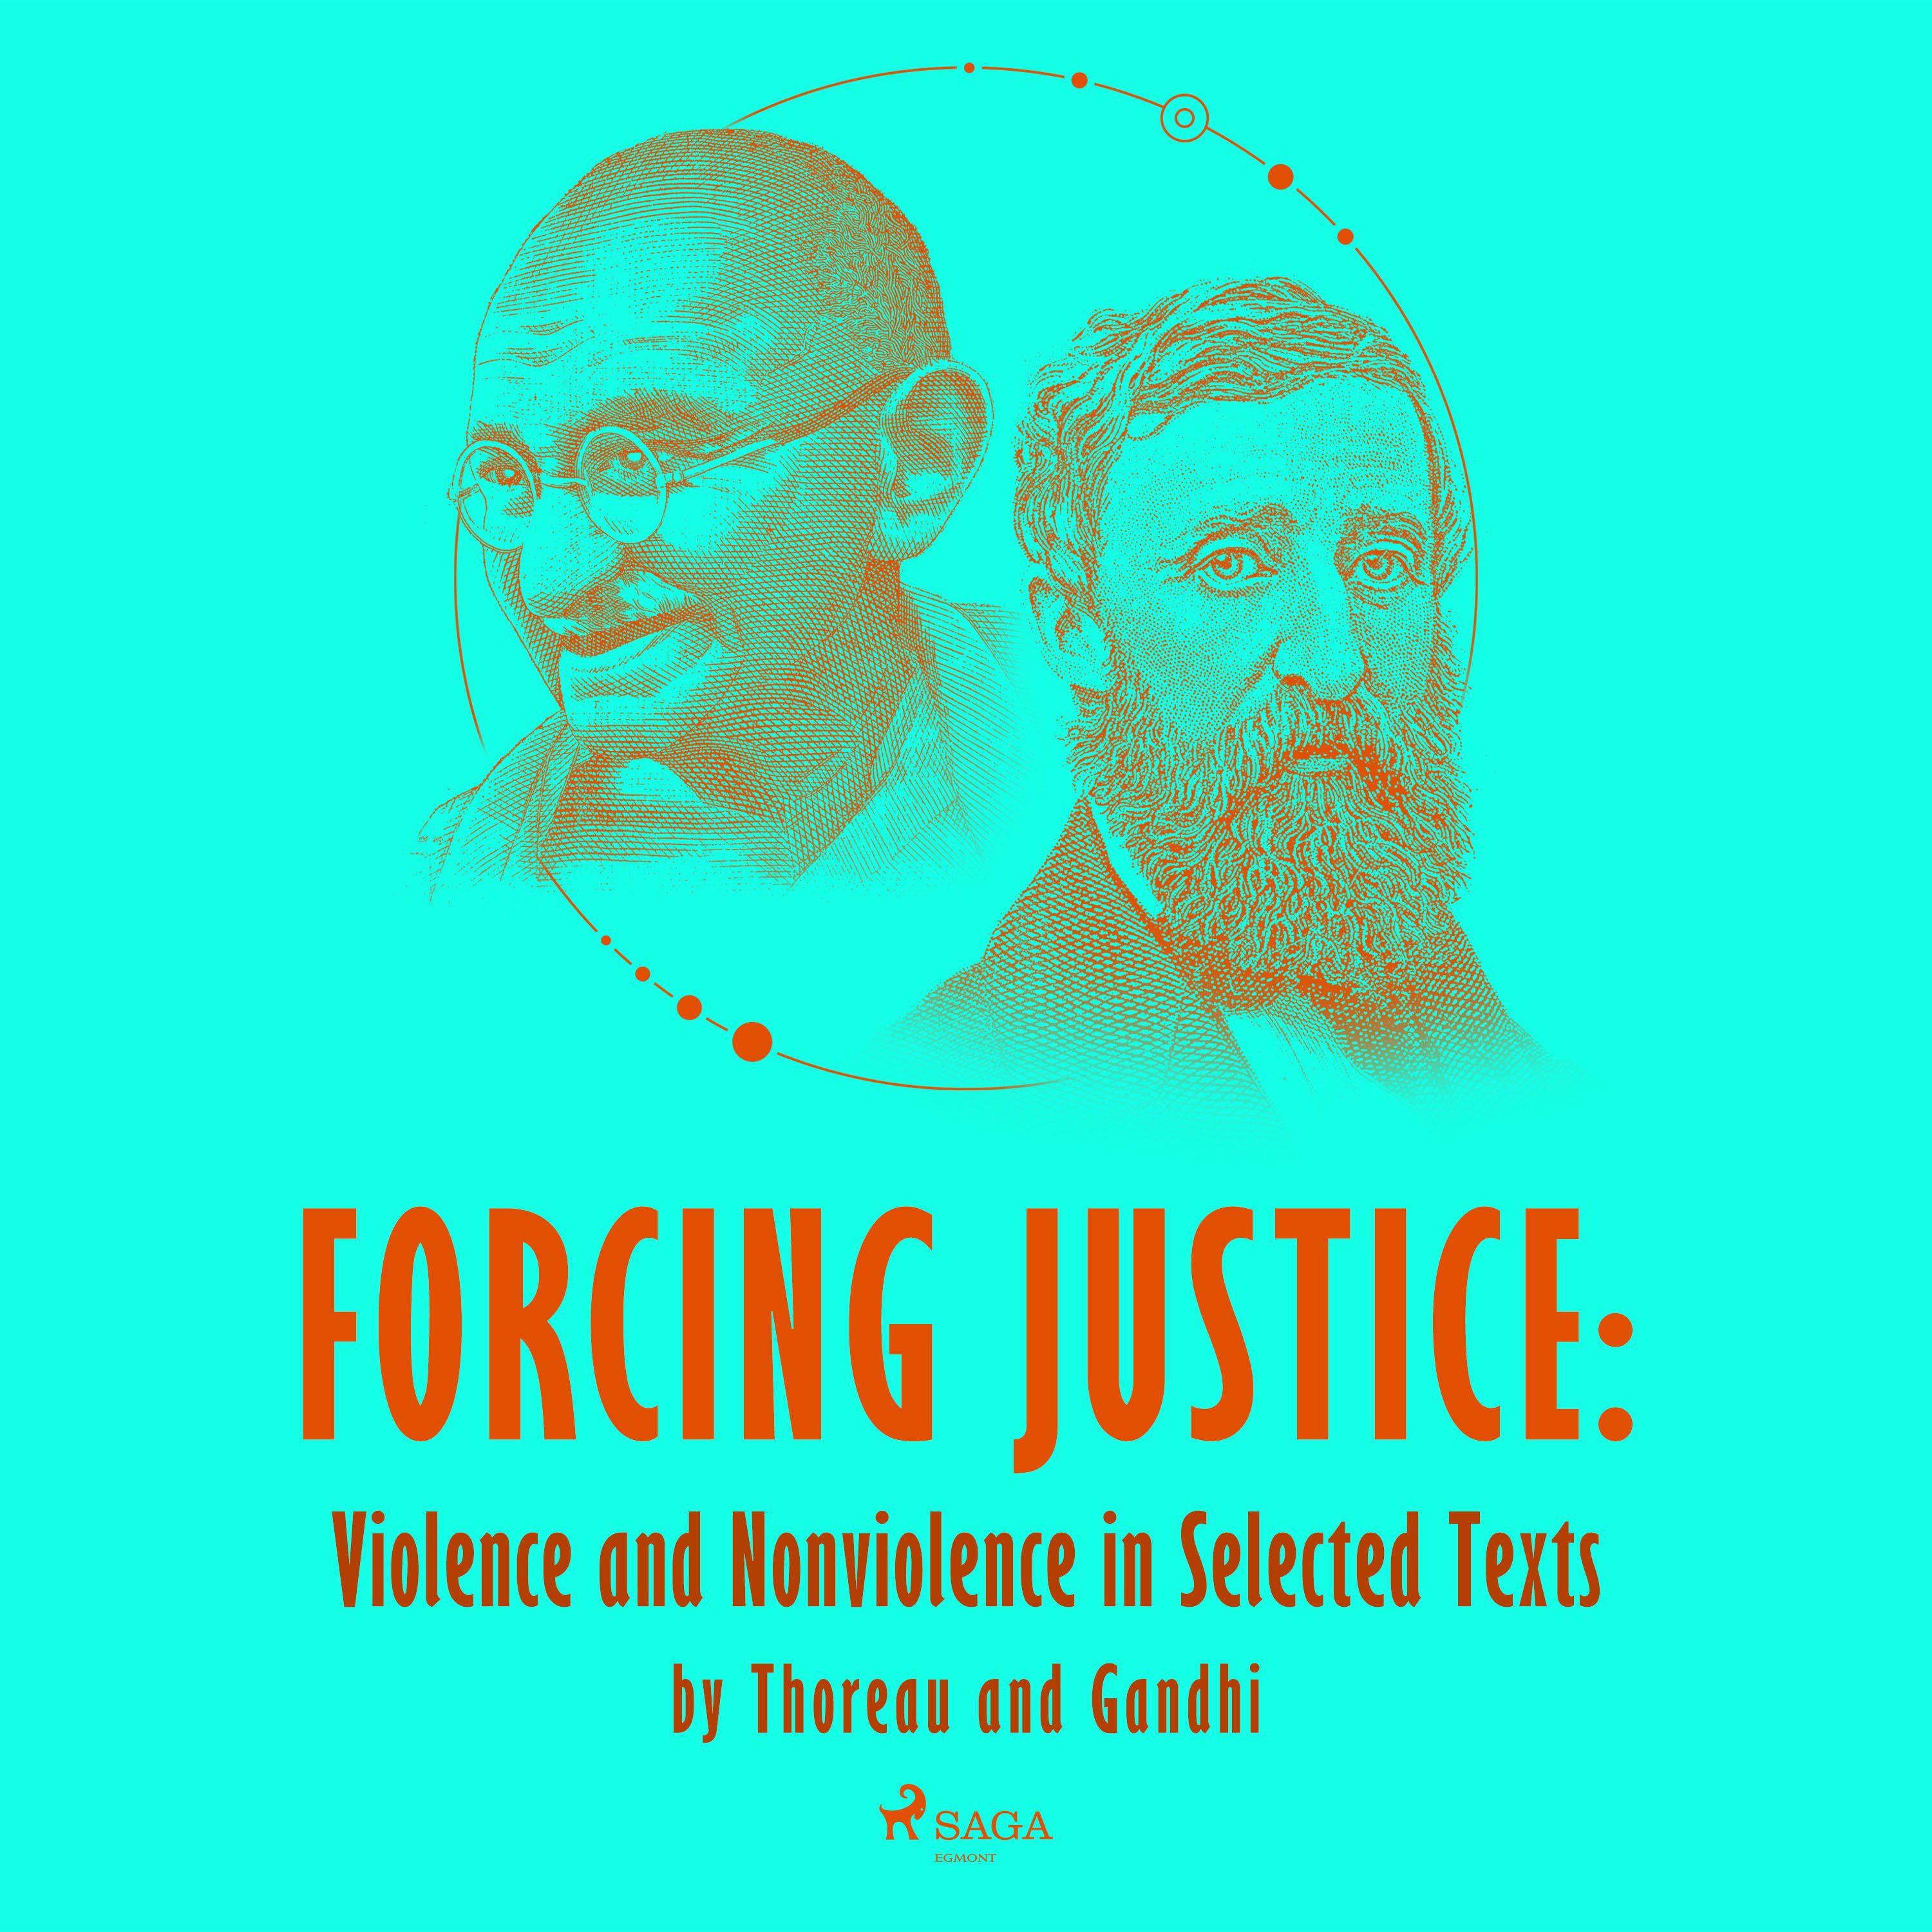 Forcing Justice: Violence and Nonviolence in Selected Texts by Thoreau and Gandhi, lydbog af Mahatma Gandhi, Henry David Thoreau